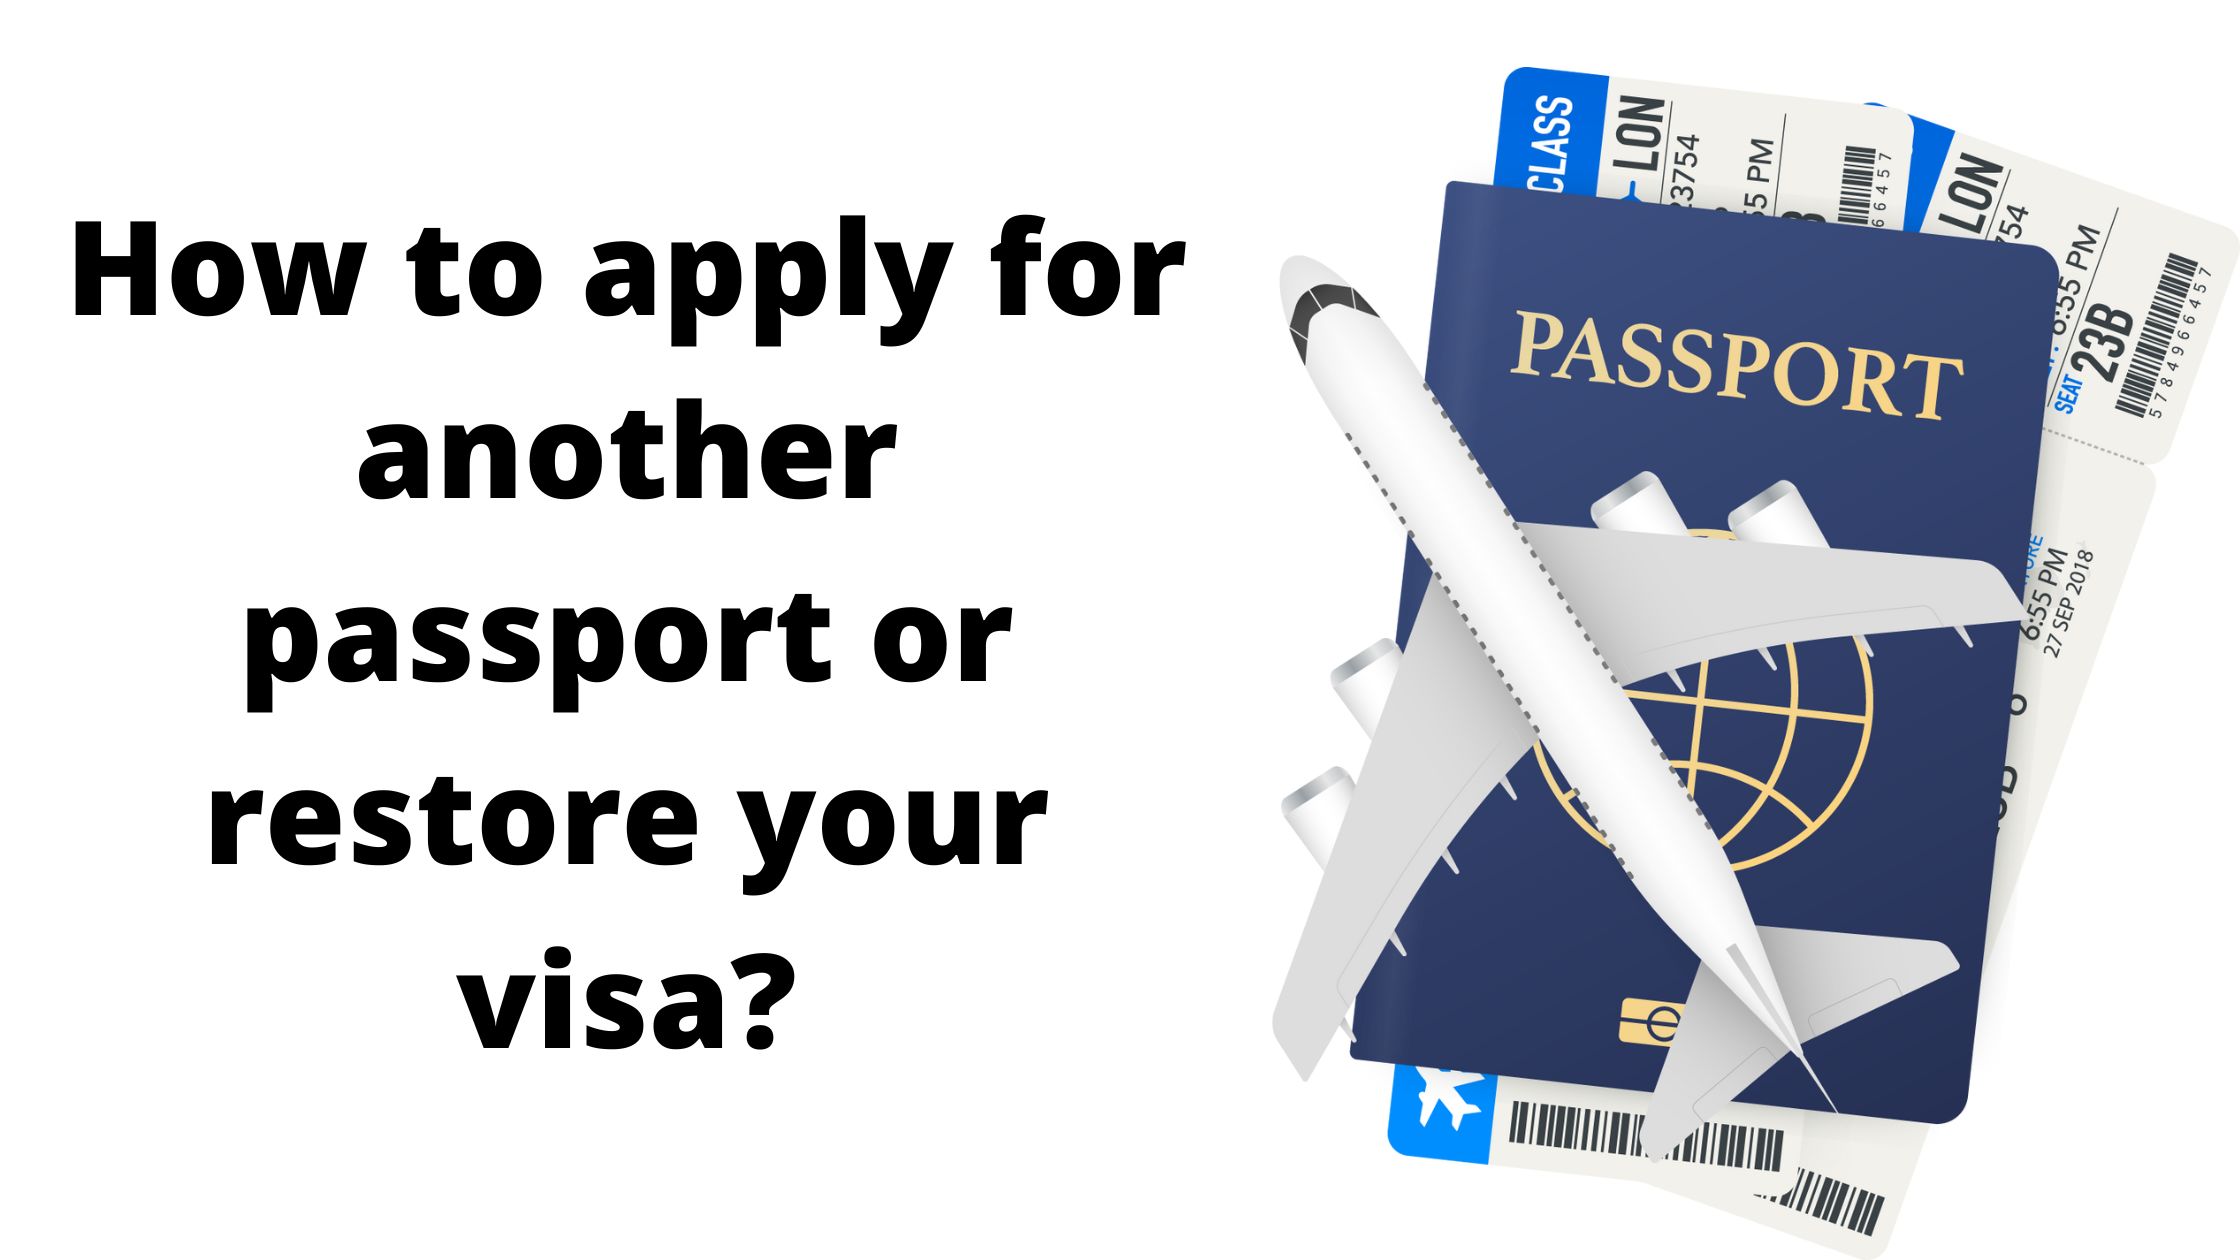 How to apply for another passport or restore your visa